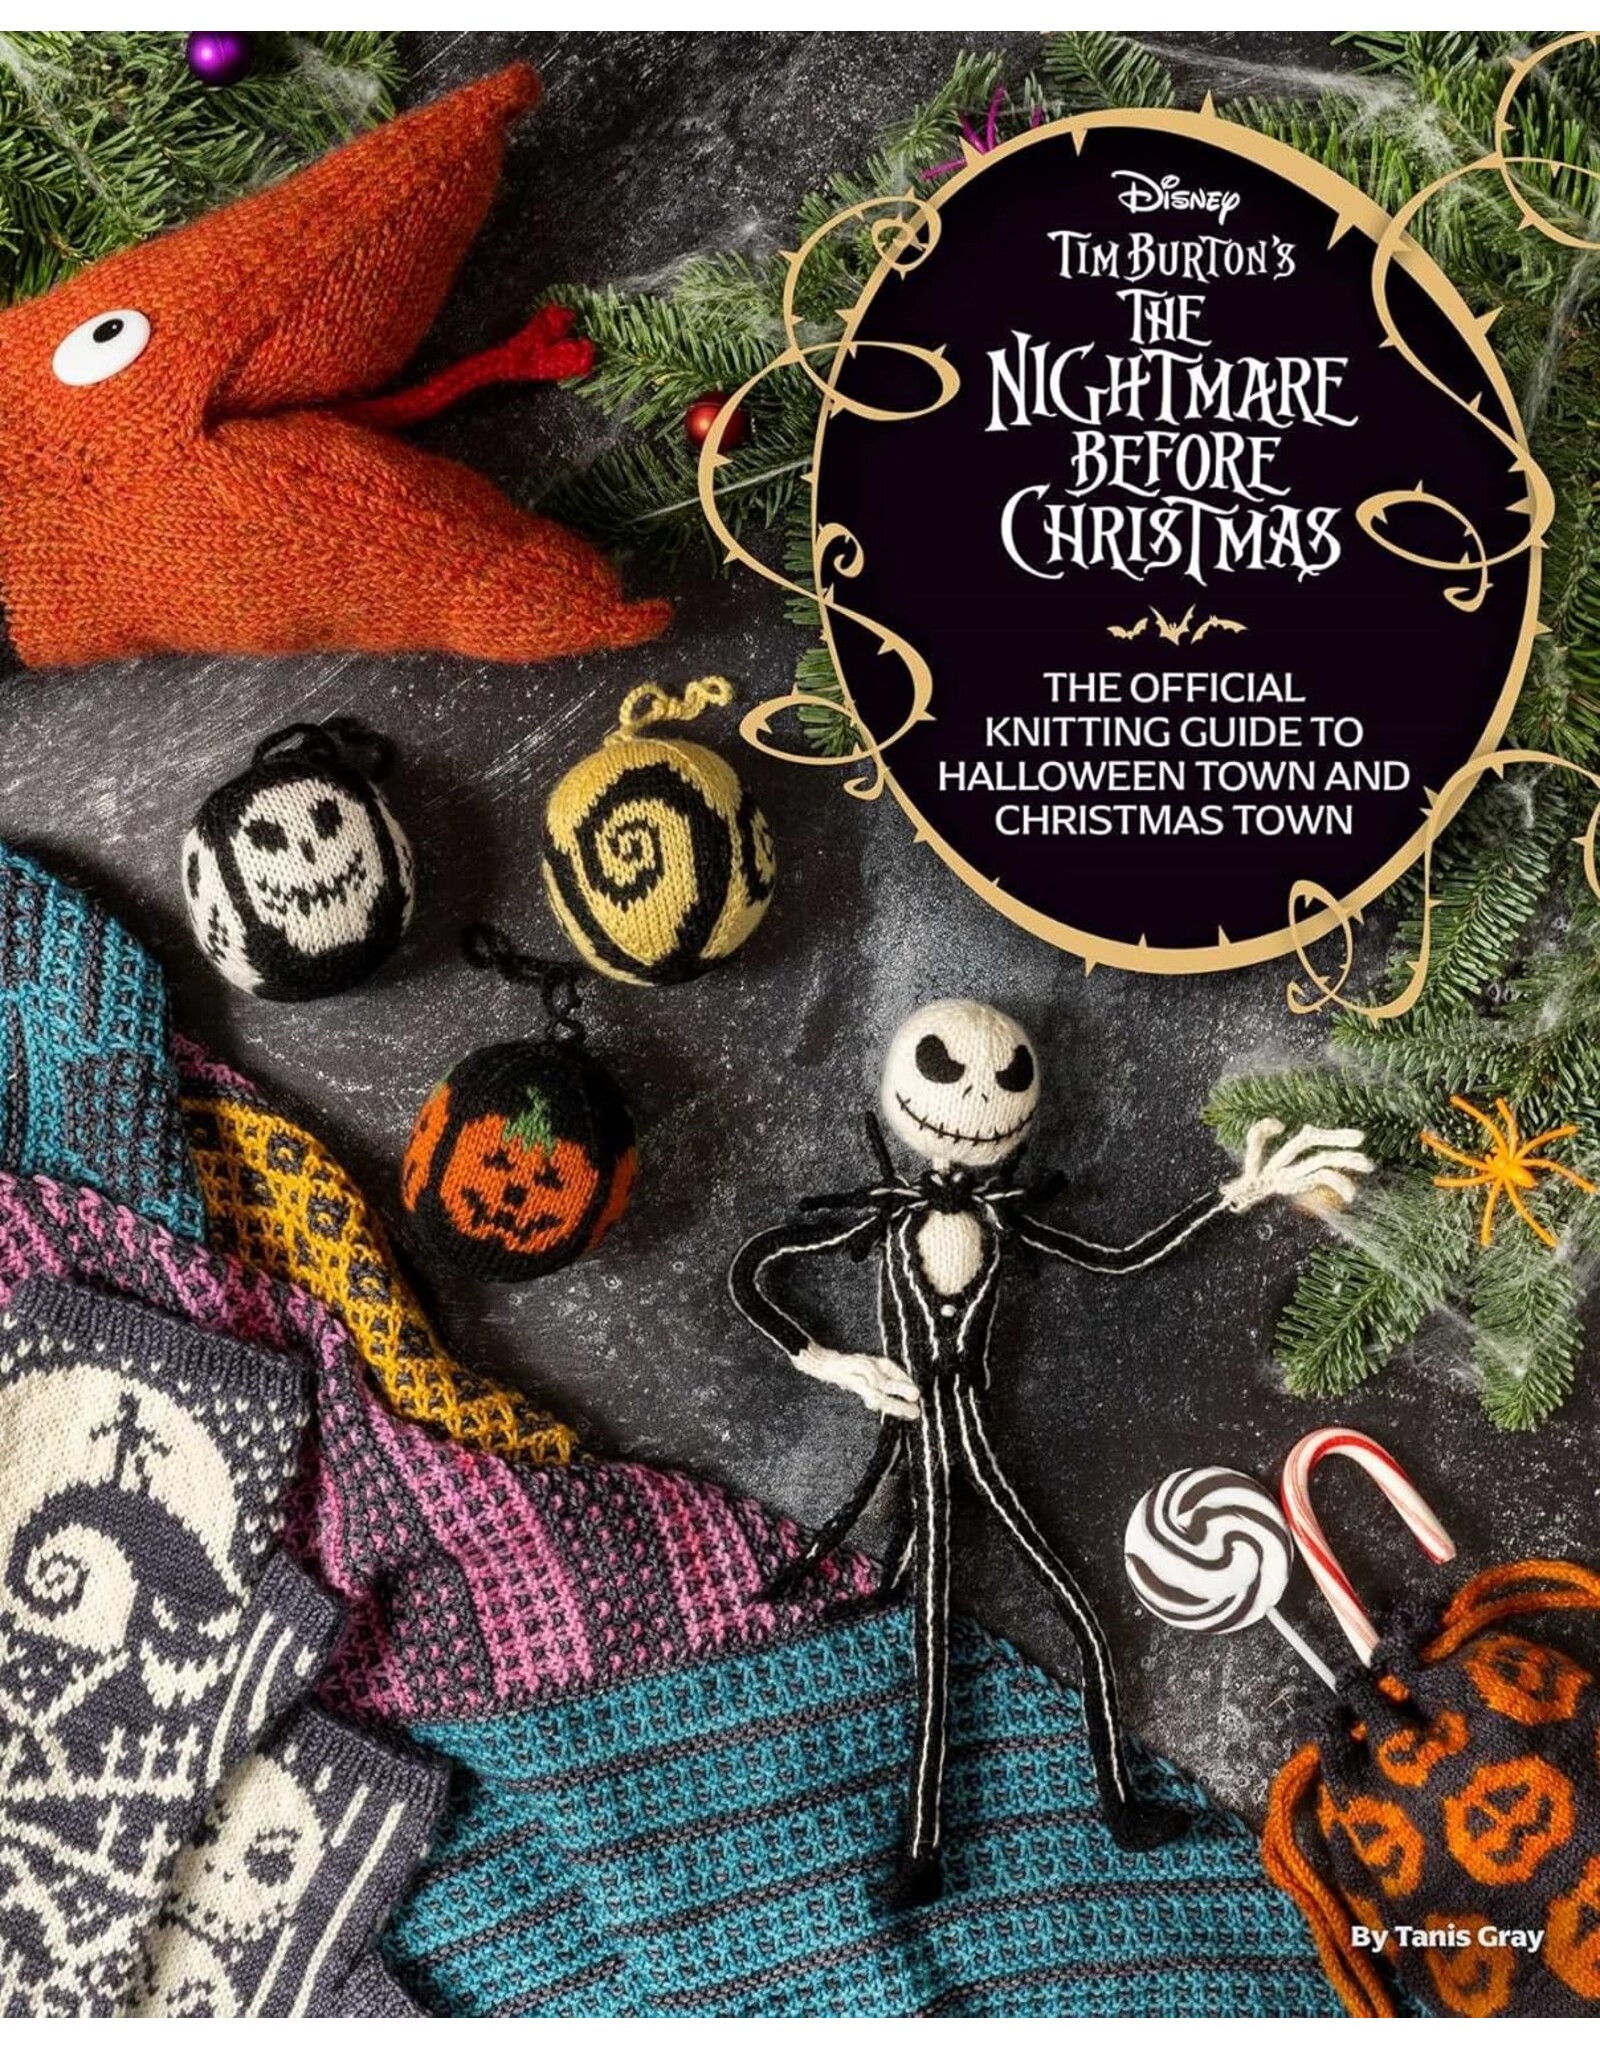 Tanis Gray The Disney Tim Burton's Nightmare Before Christmas: The Official Knitting Guide to Halloween Town and Christmas Town